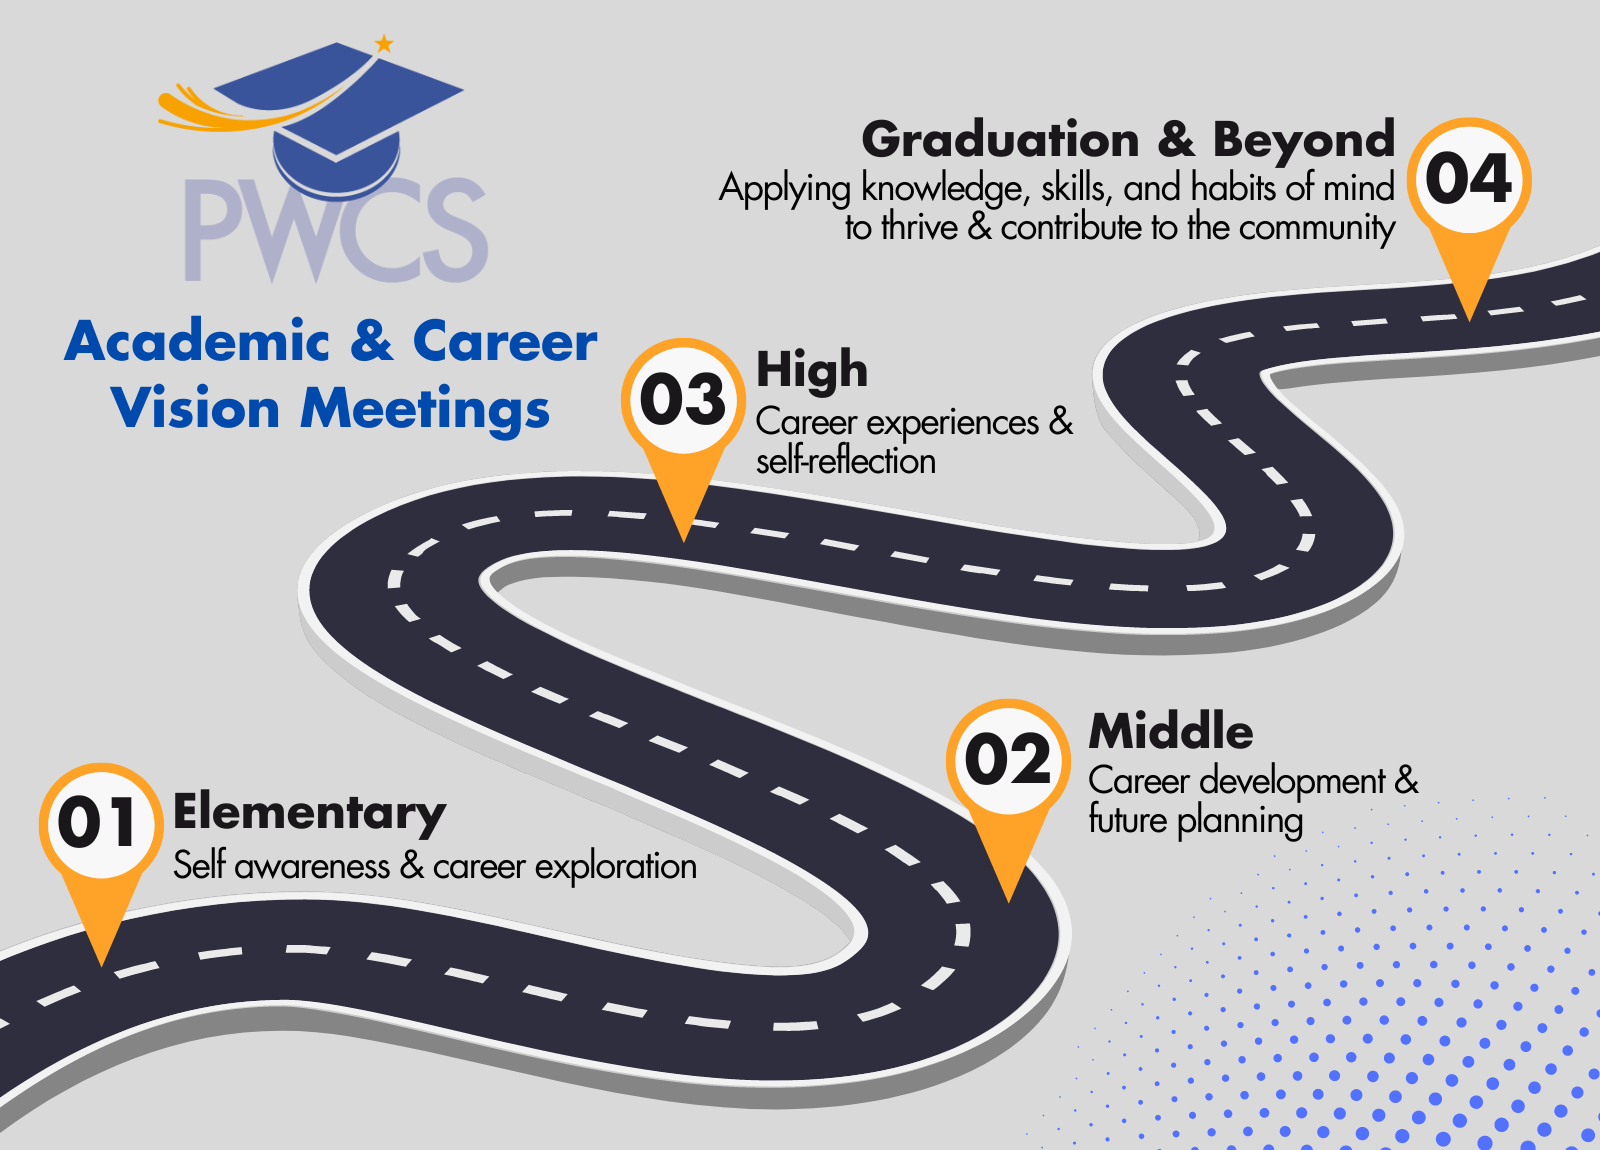 Graphic showing the progression of academic and career vision meetings beginning at the elementary level through middle, high, and graduation and beyond